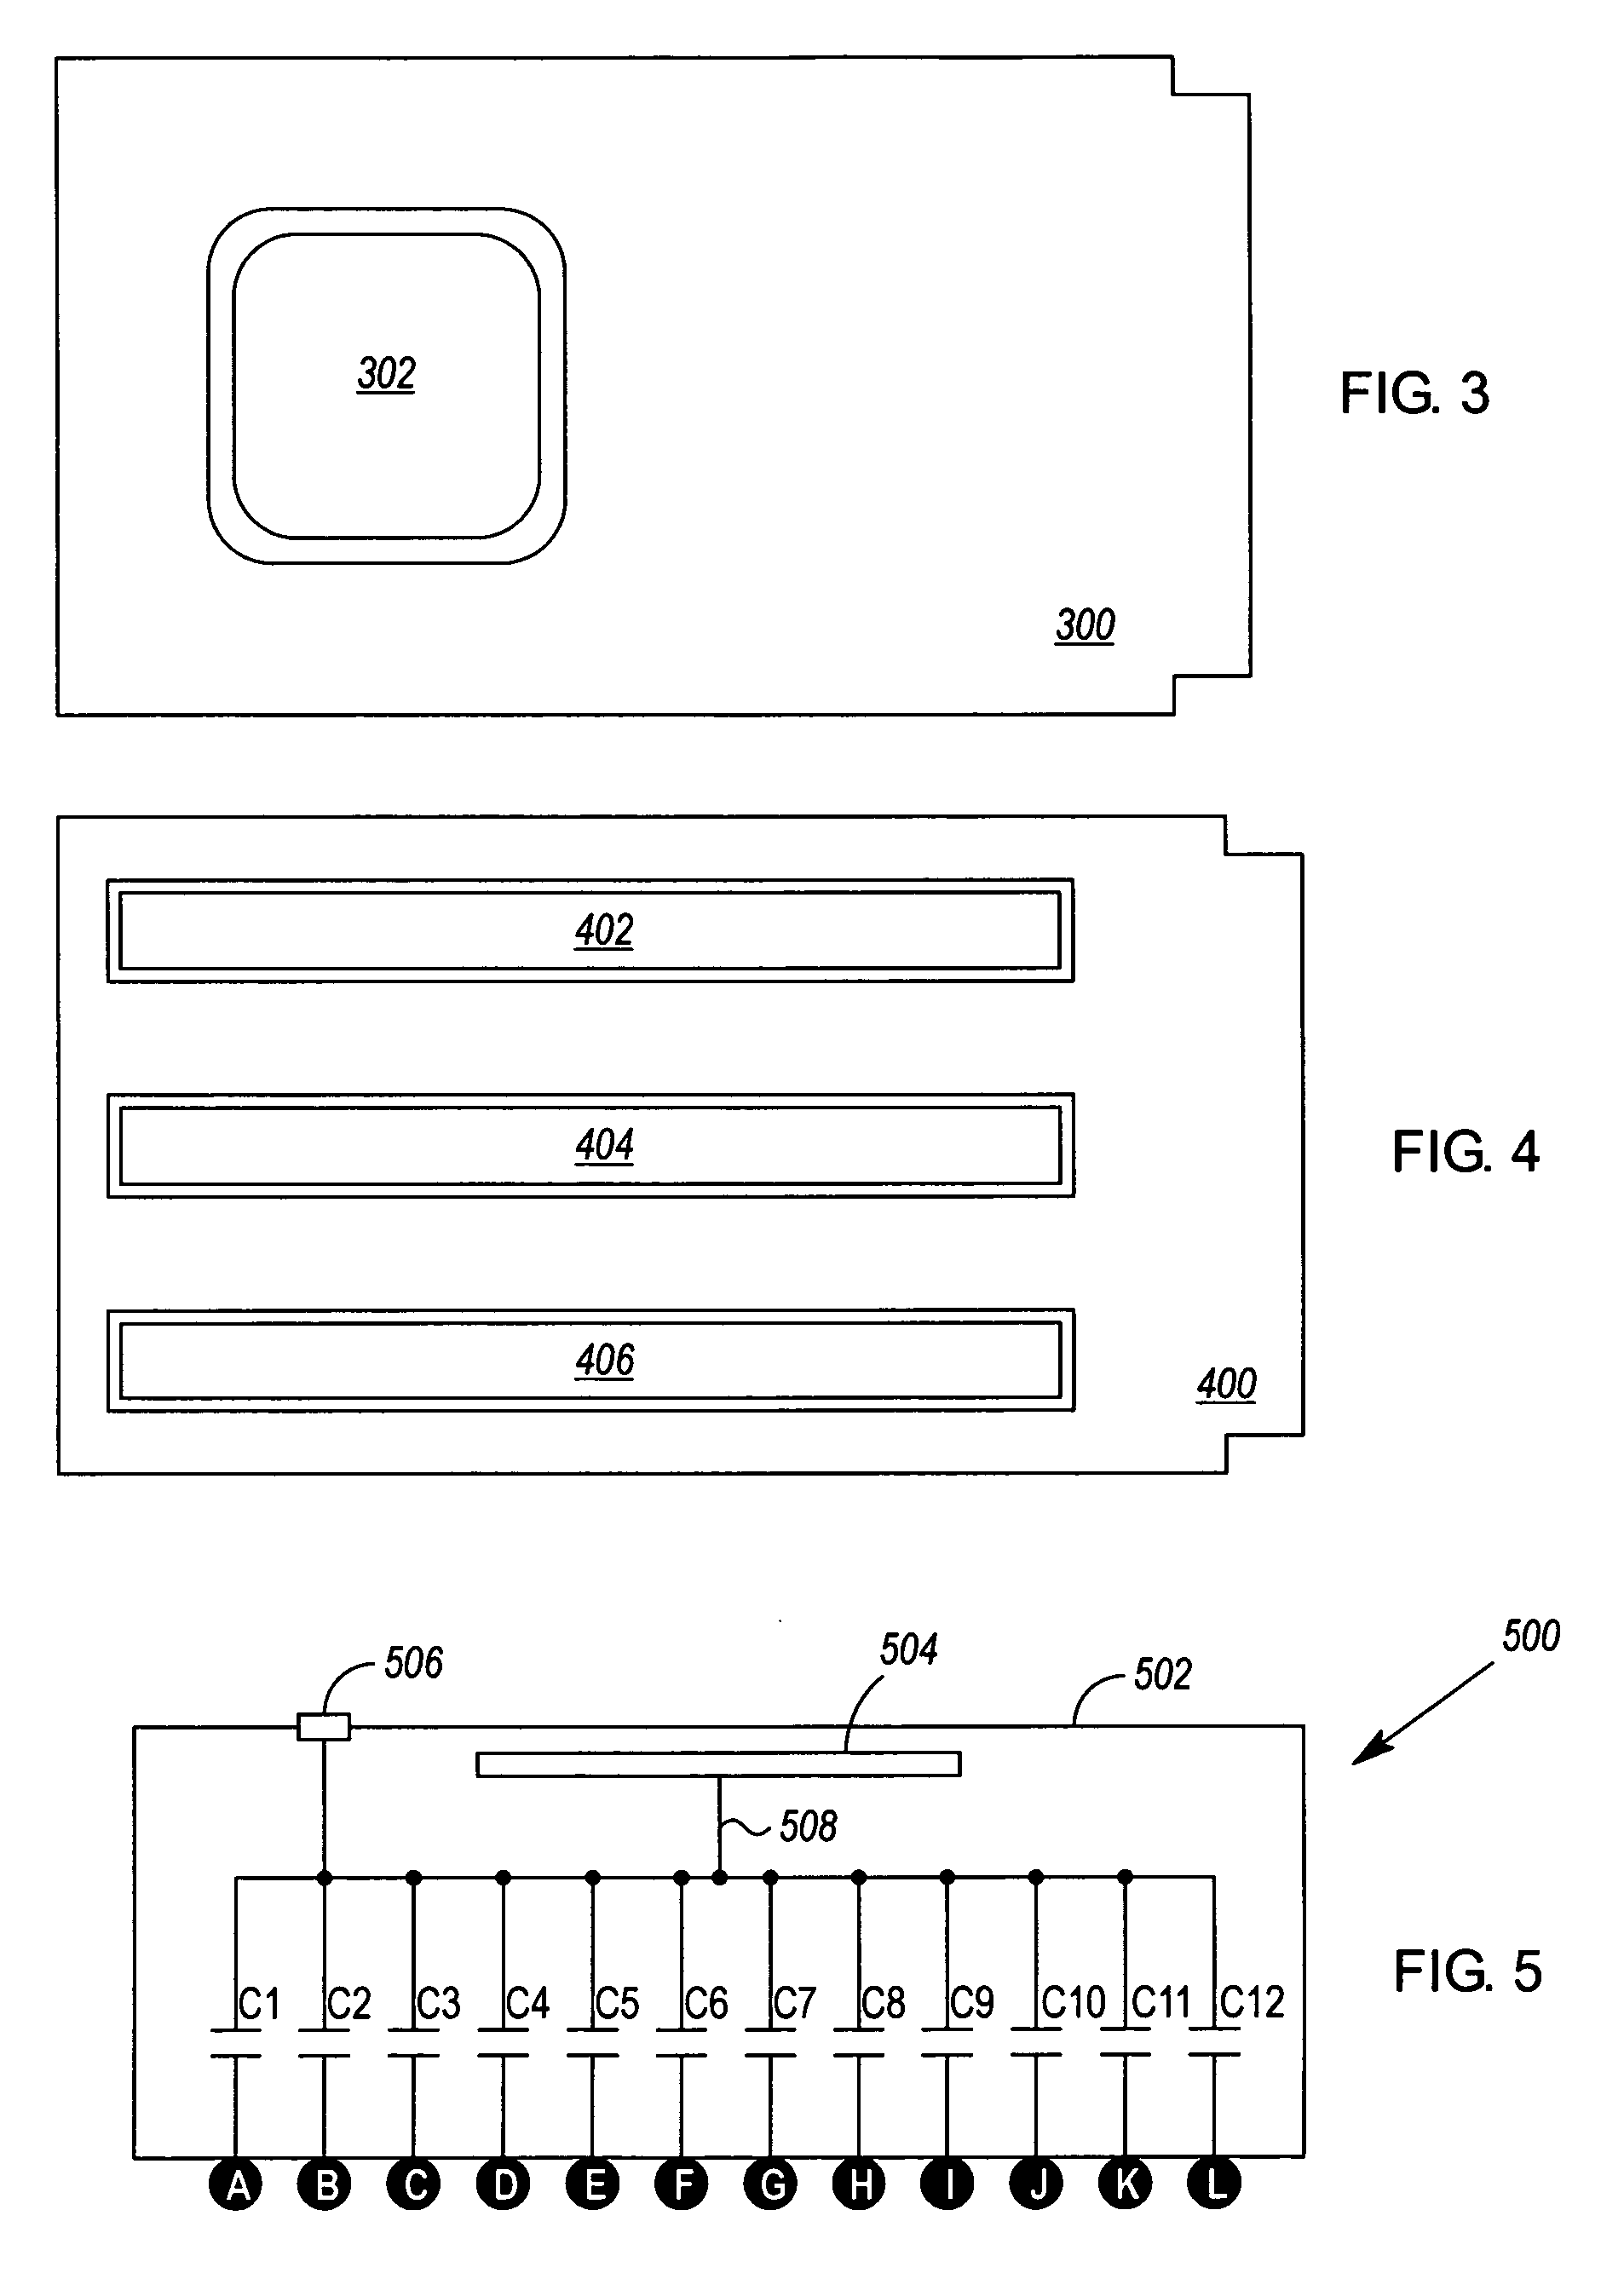 Methods and apparatus for testing continuity of electrical paths through connectors of circuit assemblies